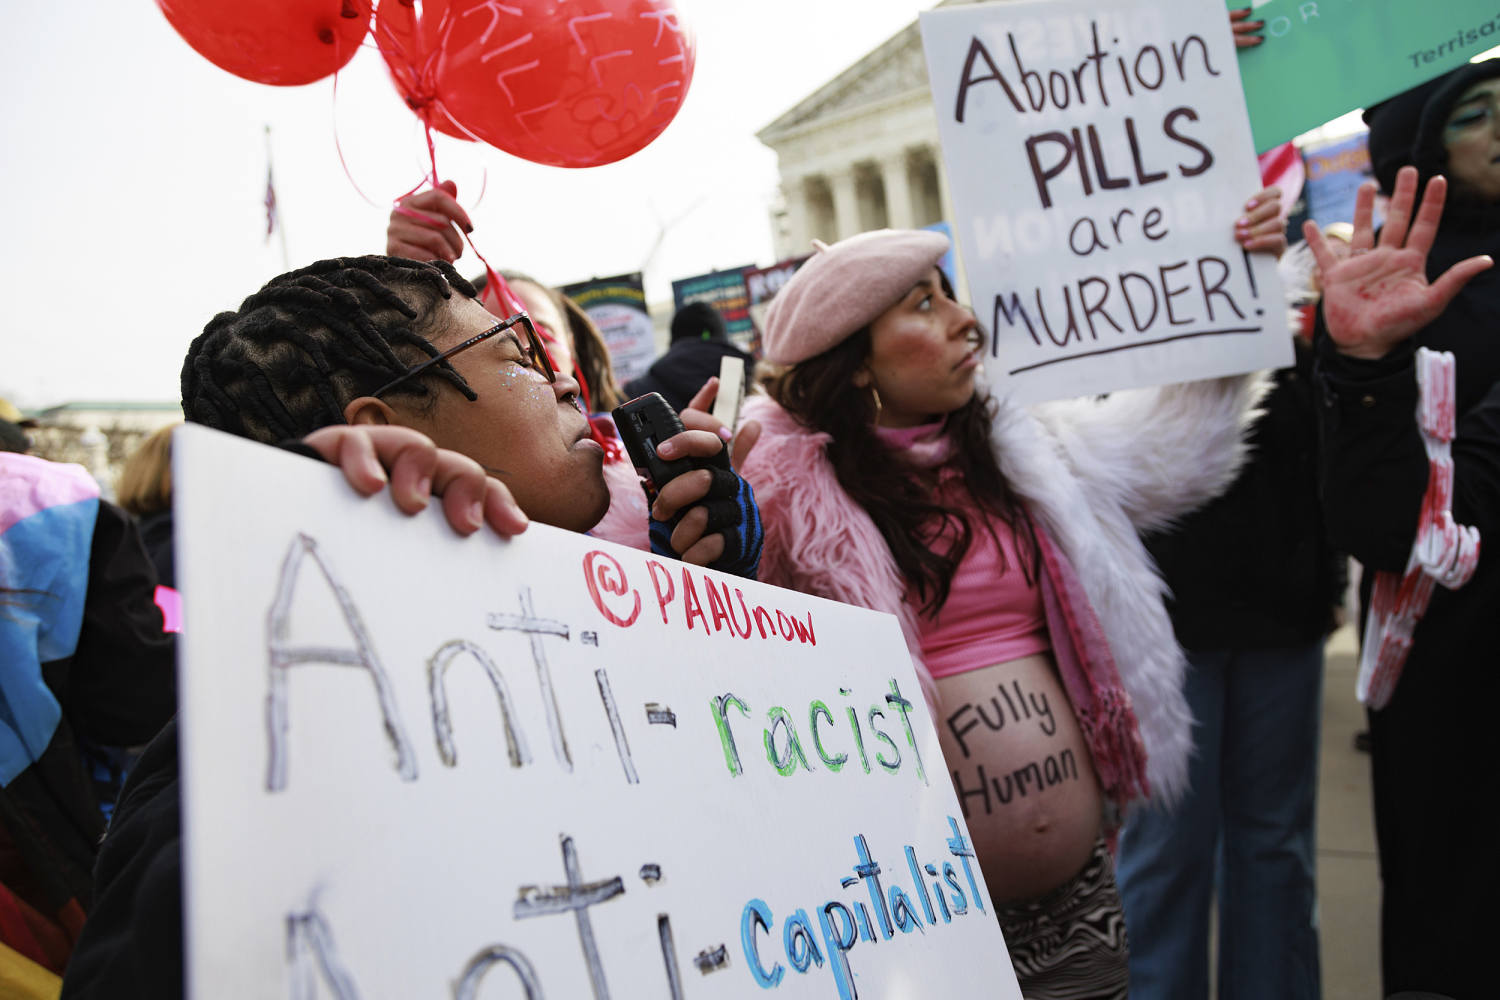 Arizona anti-abortion activists aren’t letting up after Supreme Court victory